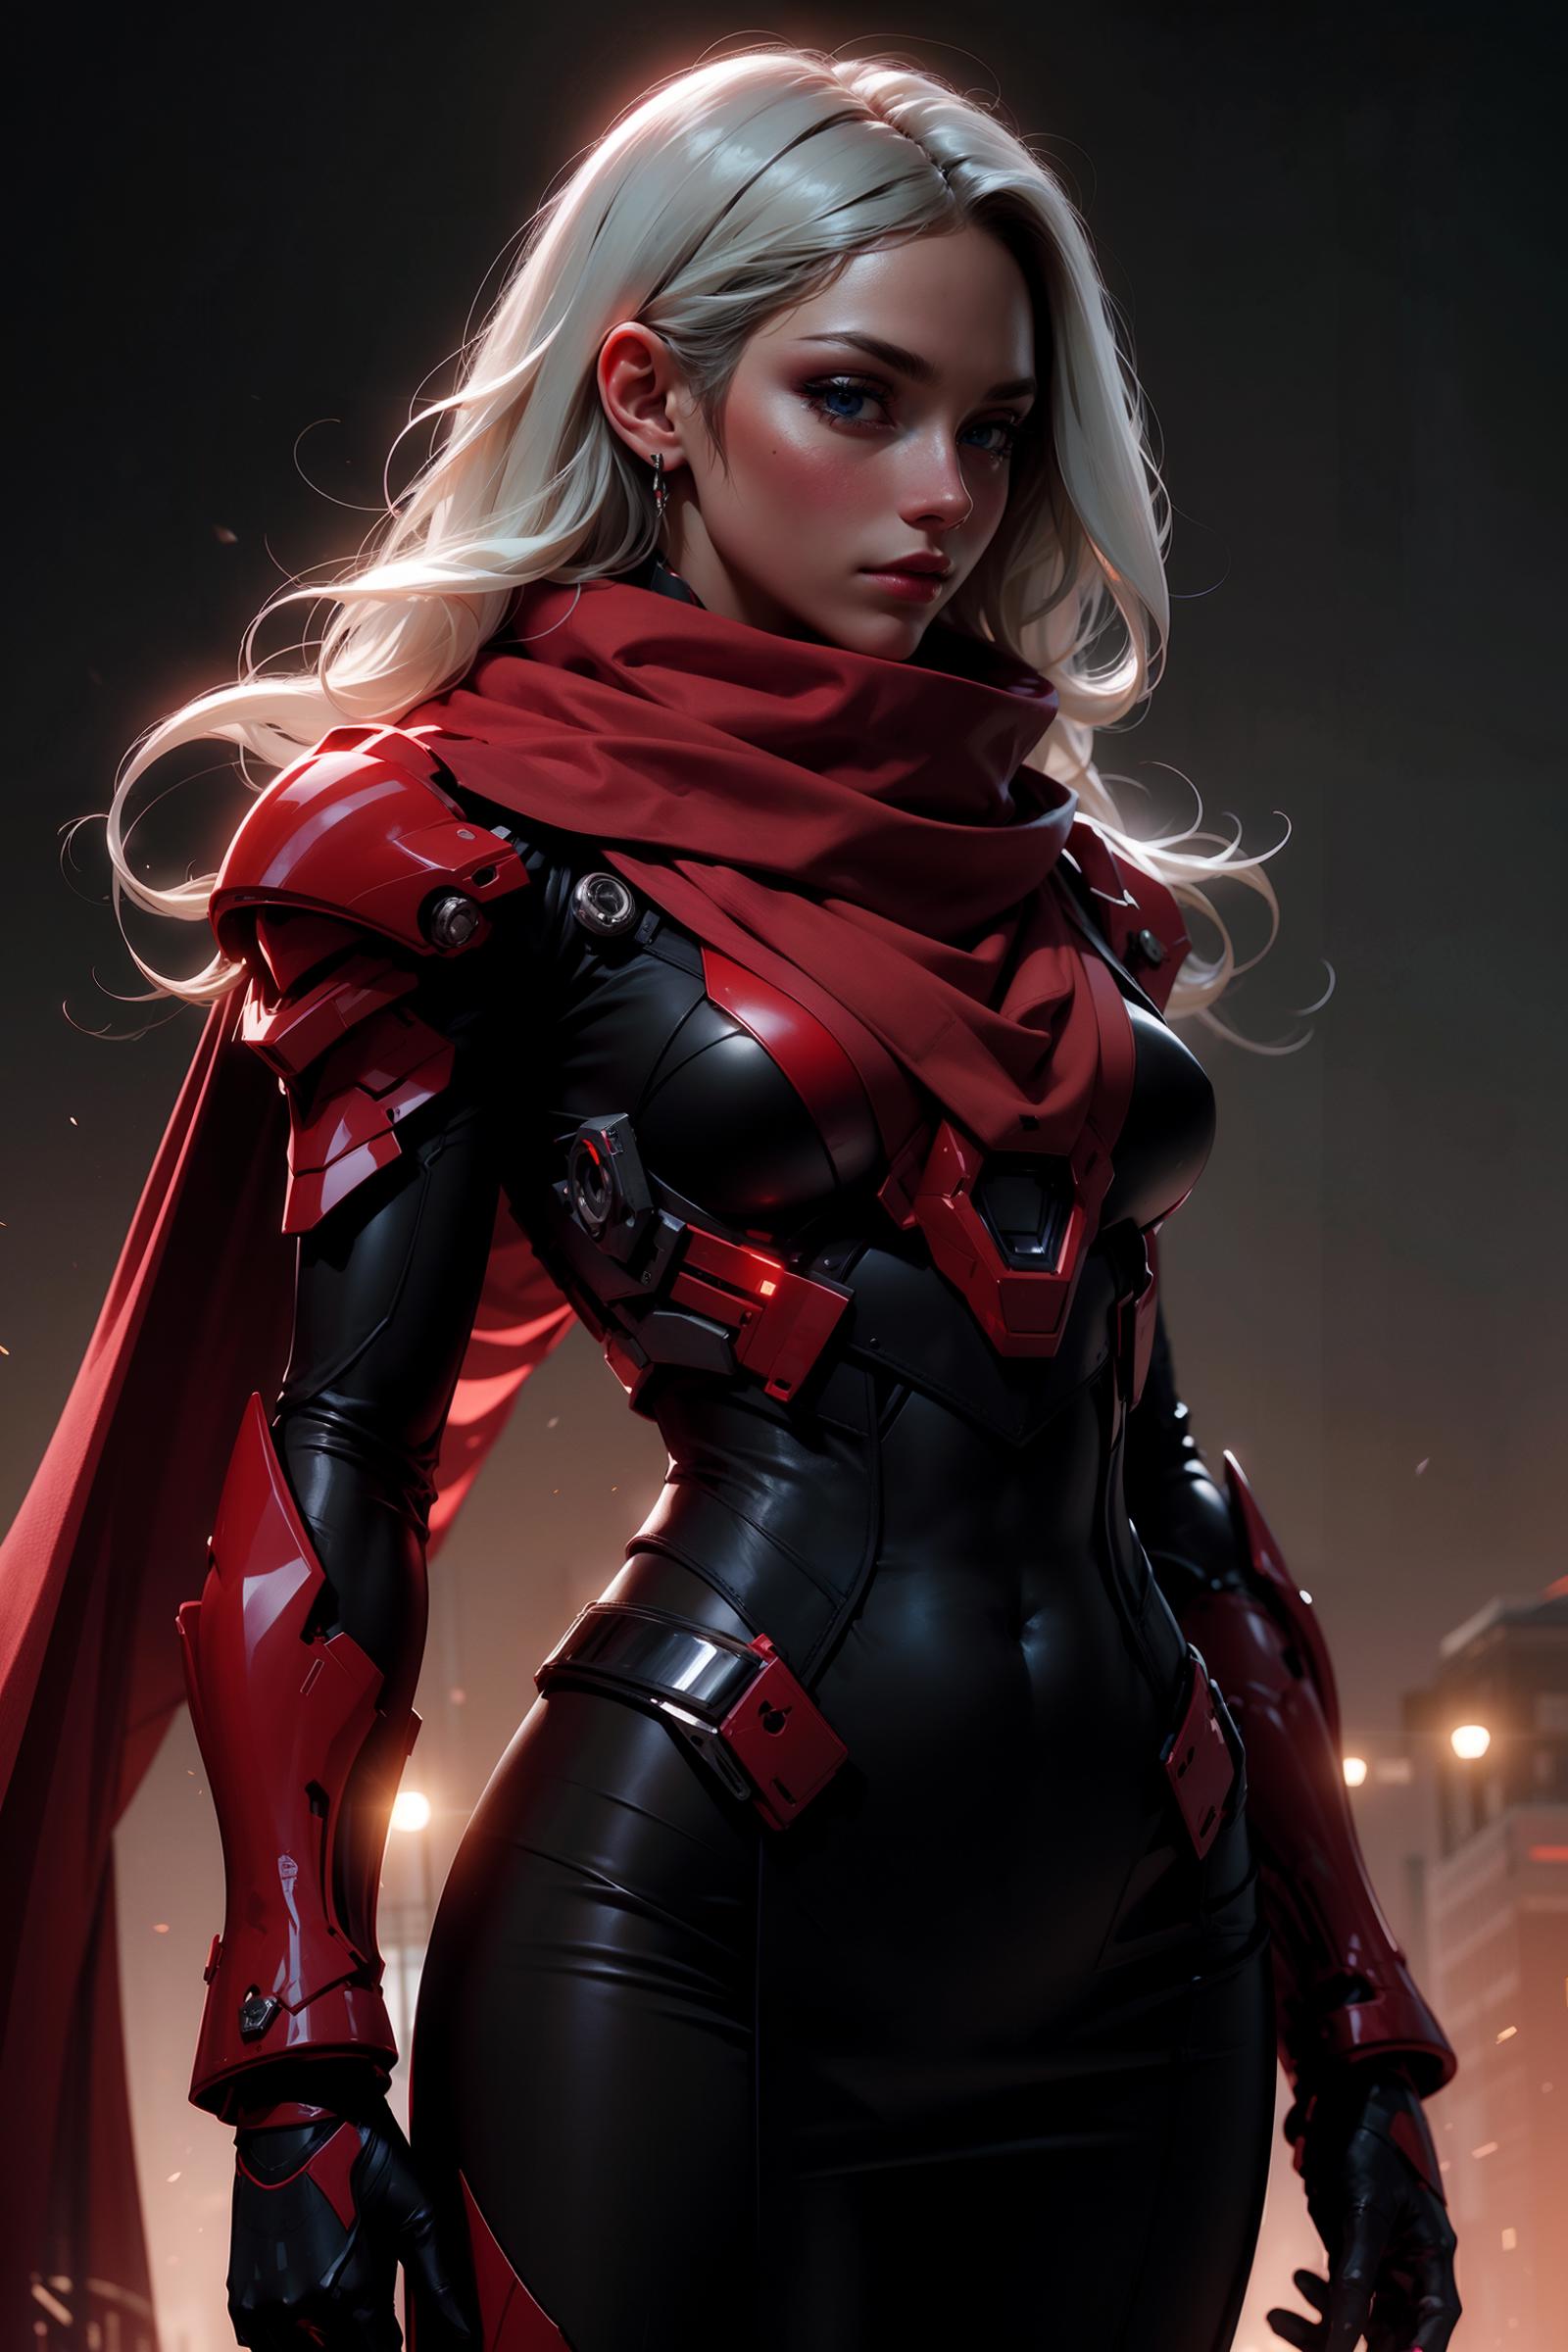 A woman with blonde hair in a red and black costume.